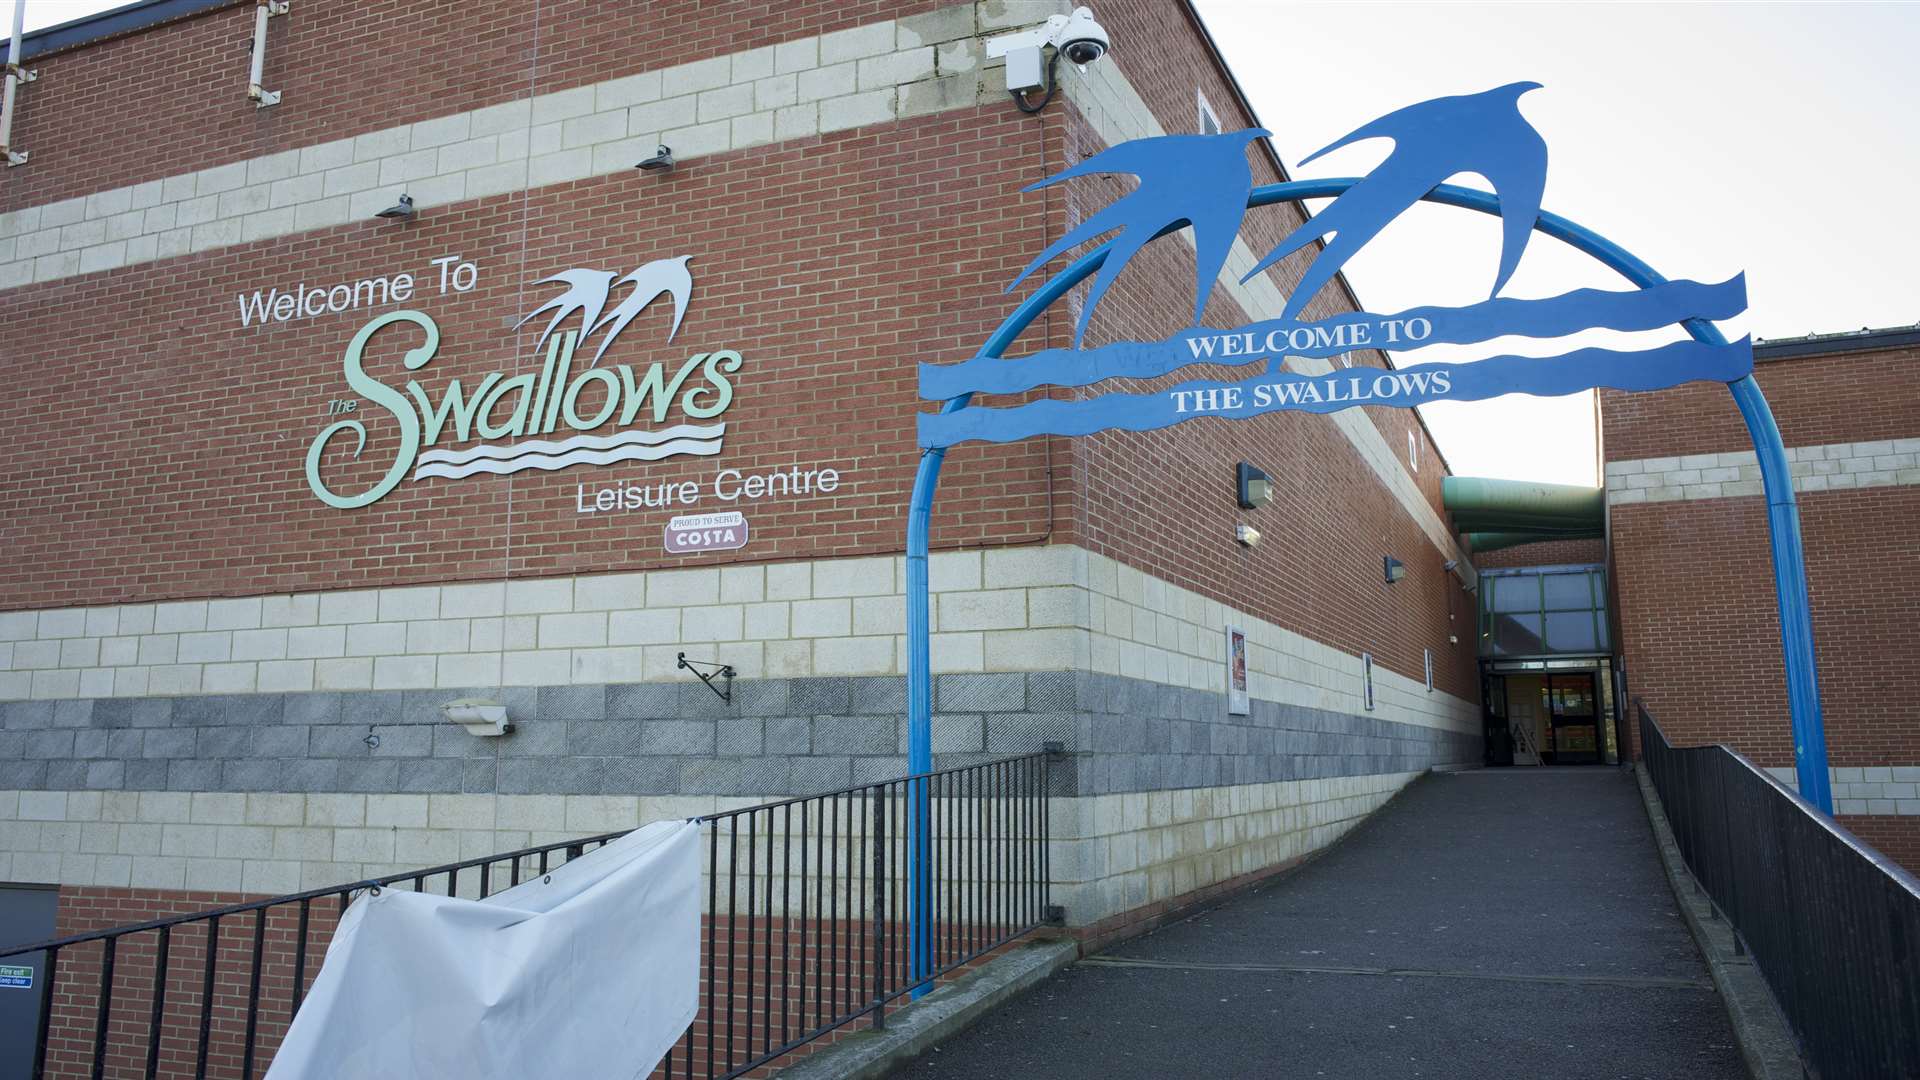 The Swallows leisure centre